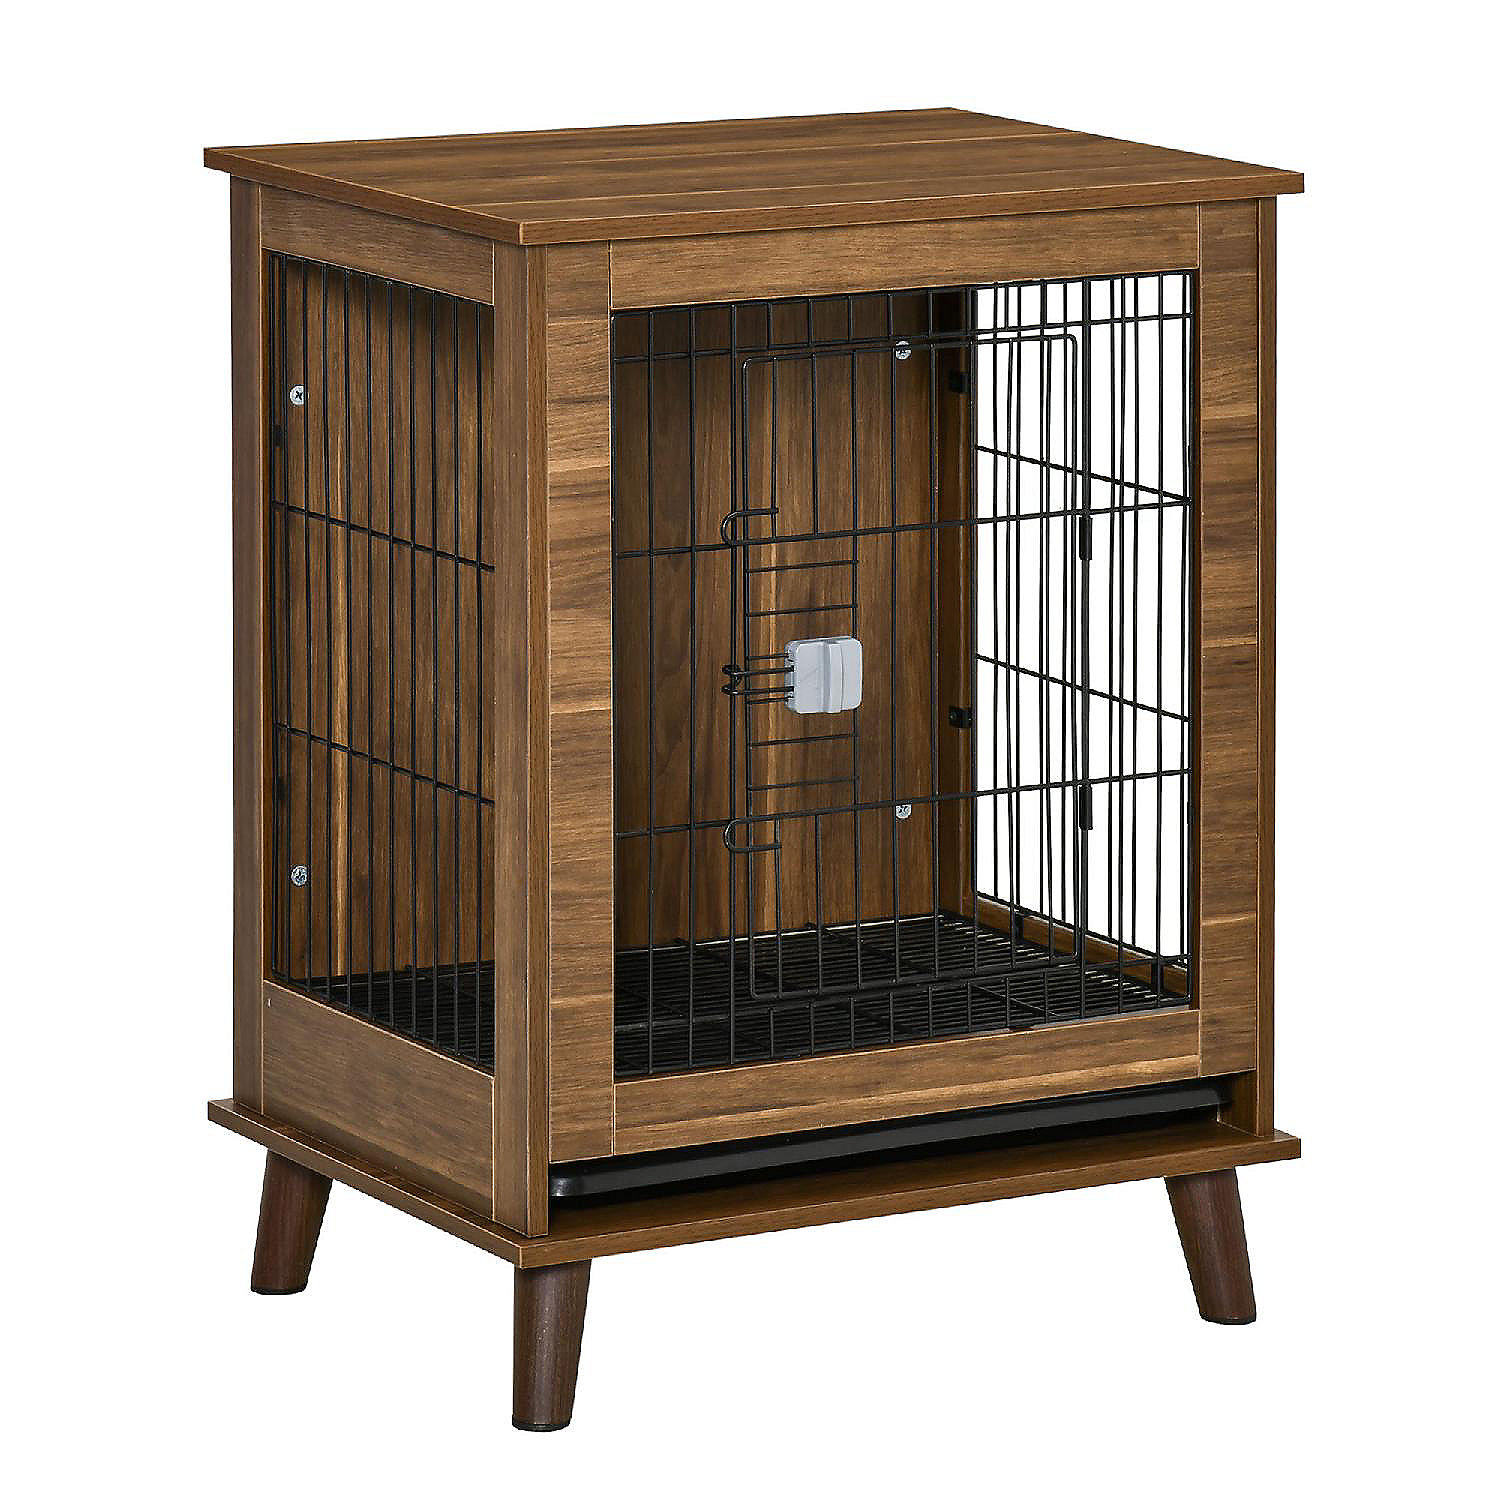 PawHut Wooden Dog Kennel End Table Furniture with Lockable Magnetic Doors  Small Size Pet Crate Indoor Animal Cage Brown | Oriental Trading